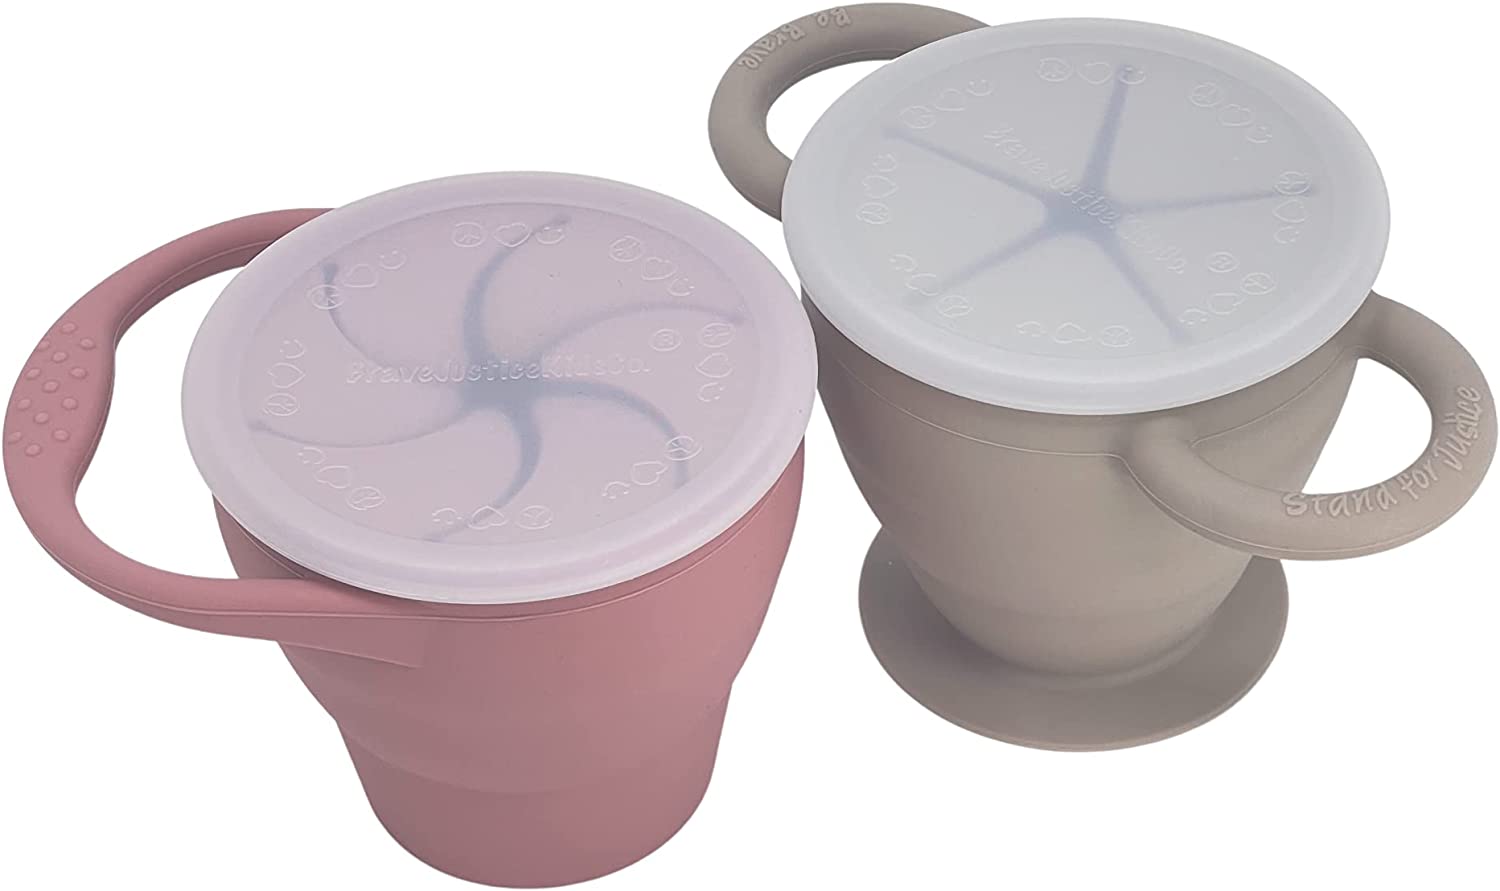 BraveJusticeKidsCo. | Snack Attack I&II Baby Snack Cup | 2 pack | Collapsible Toddler Snack Cup